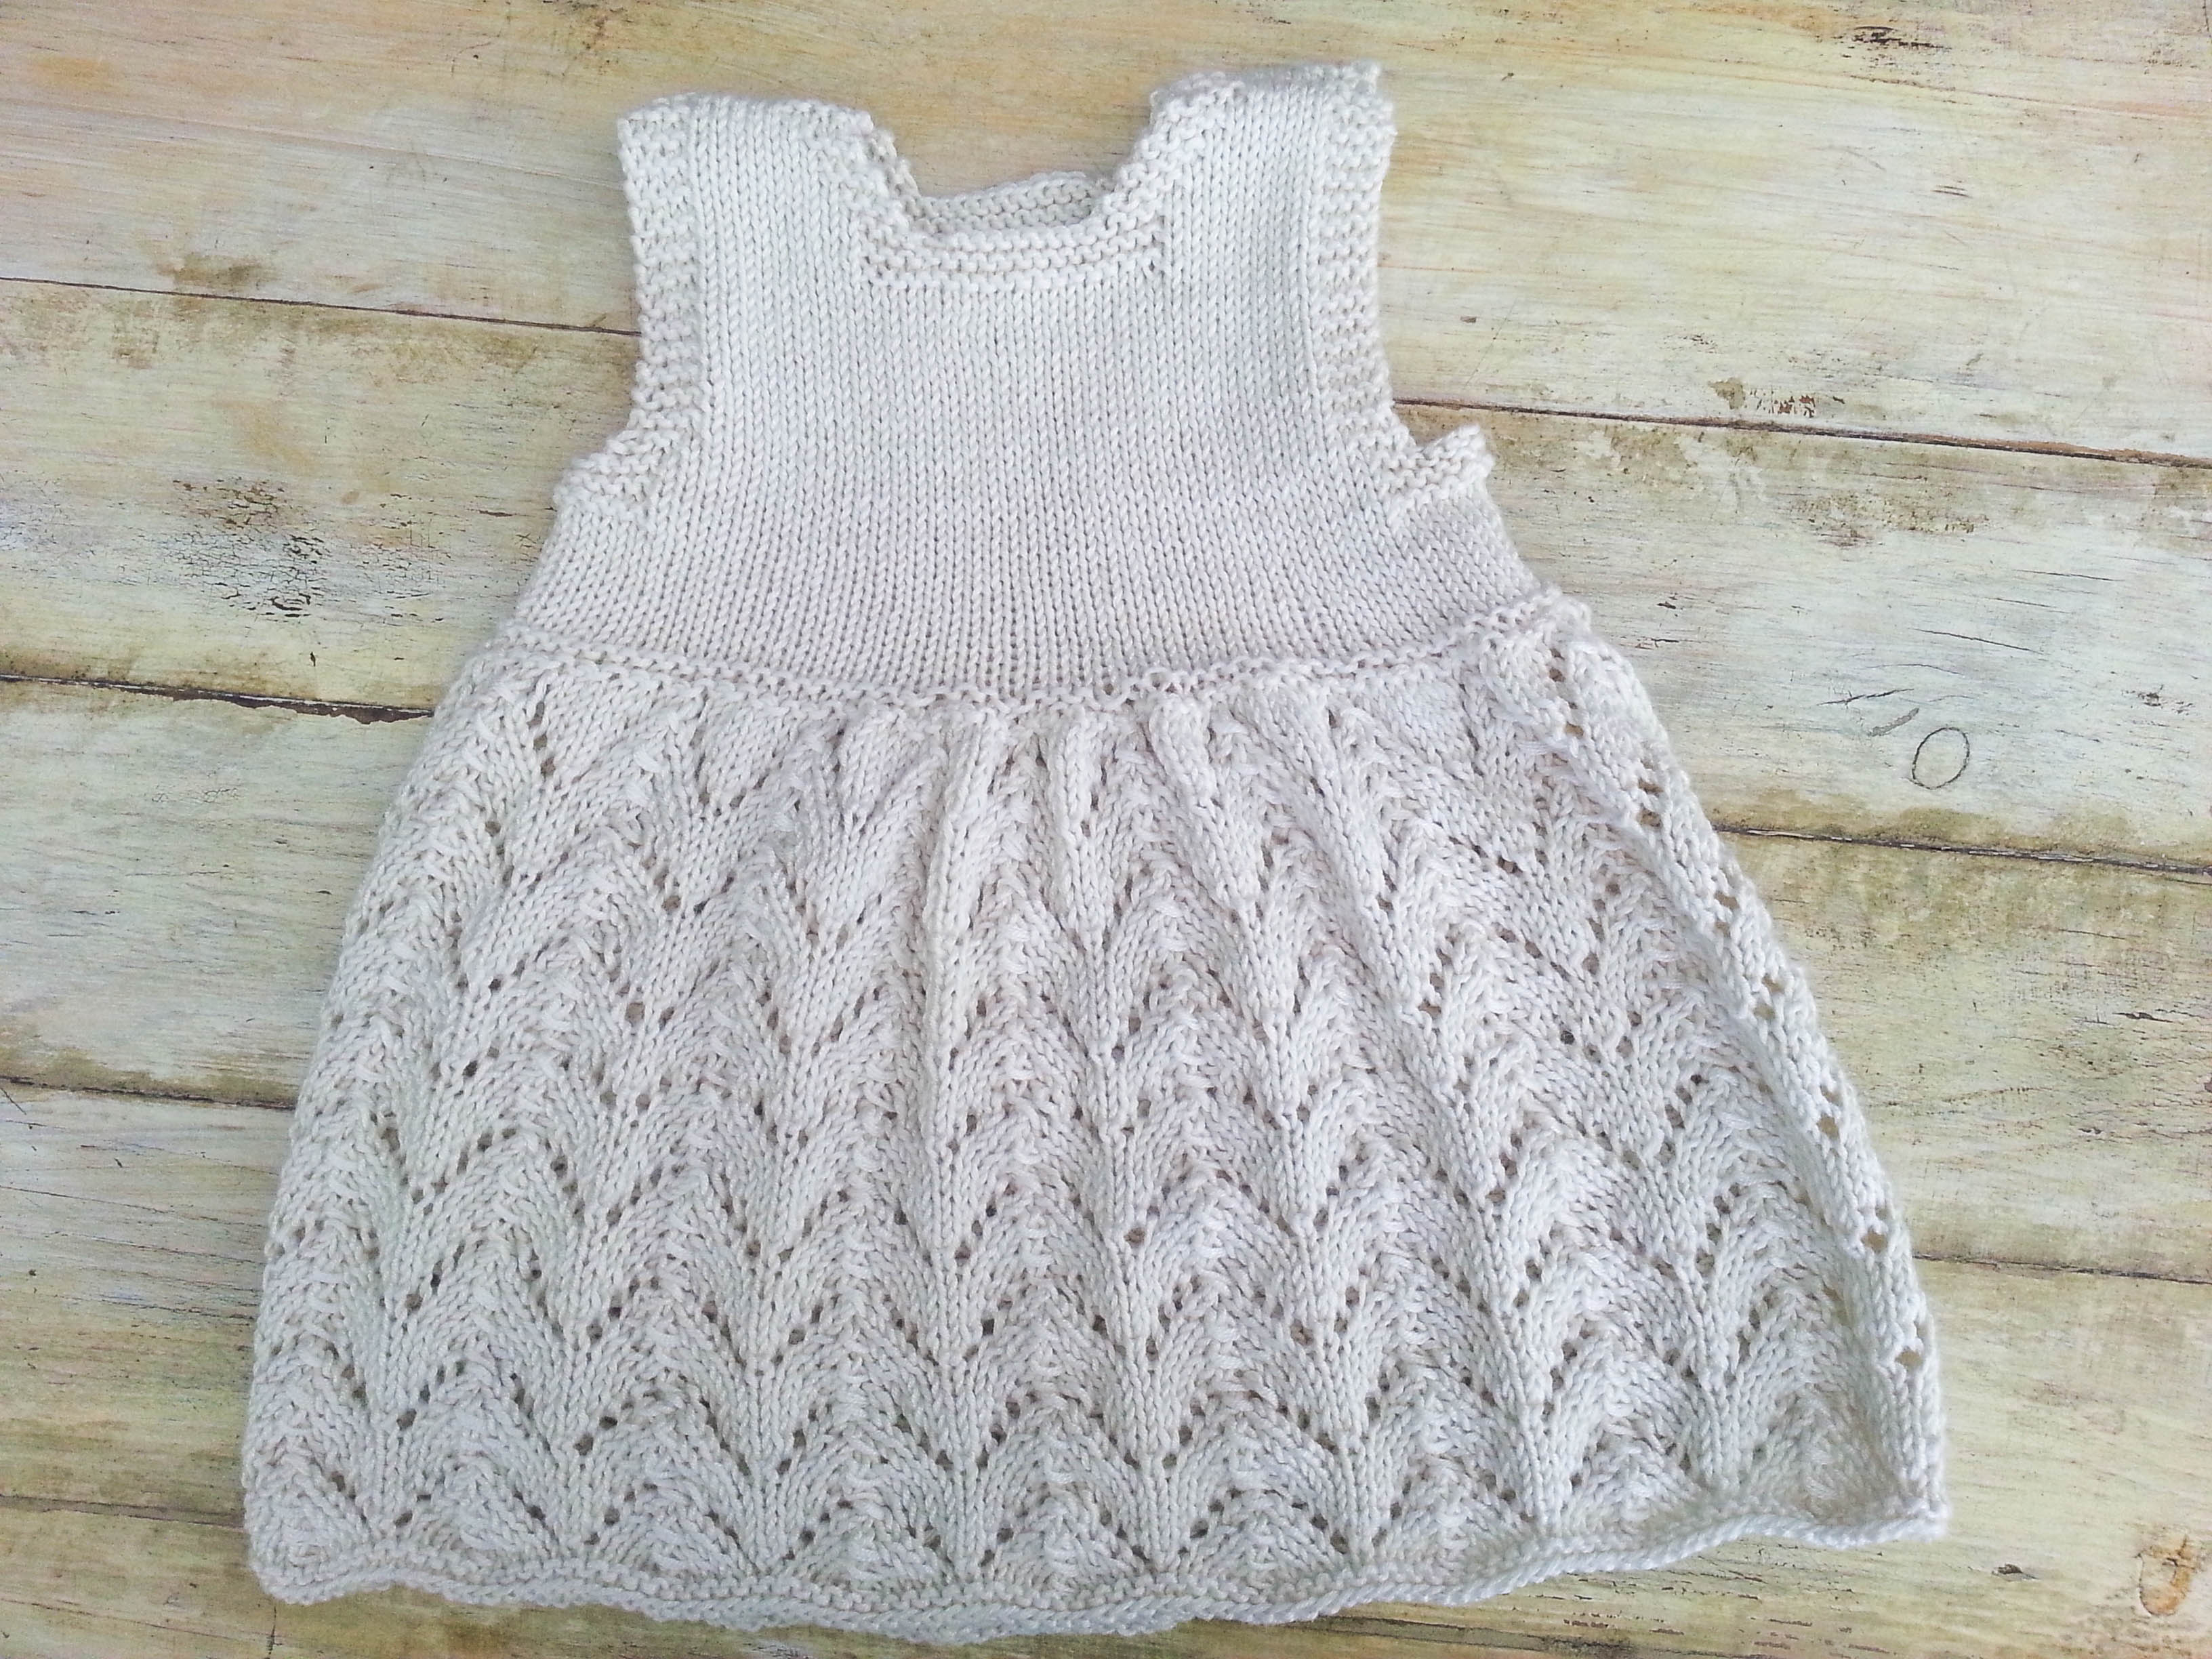 Knitted Lace Pattern Knitting Pattern Ba Lace Dress Modern Ba Lace Dress Summer Ba Dress Sizes0 6 Months 6 12 Months 1 2 Years 3 4 Years